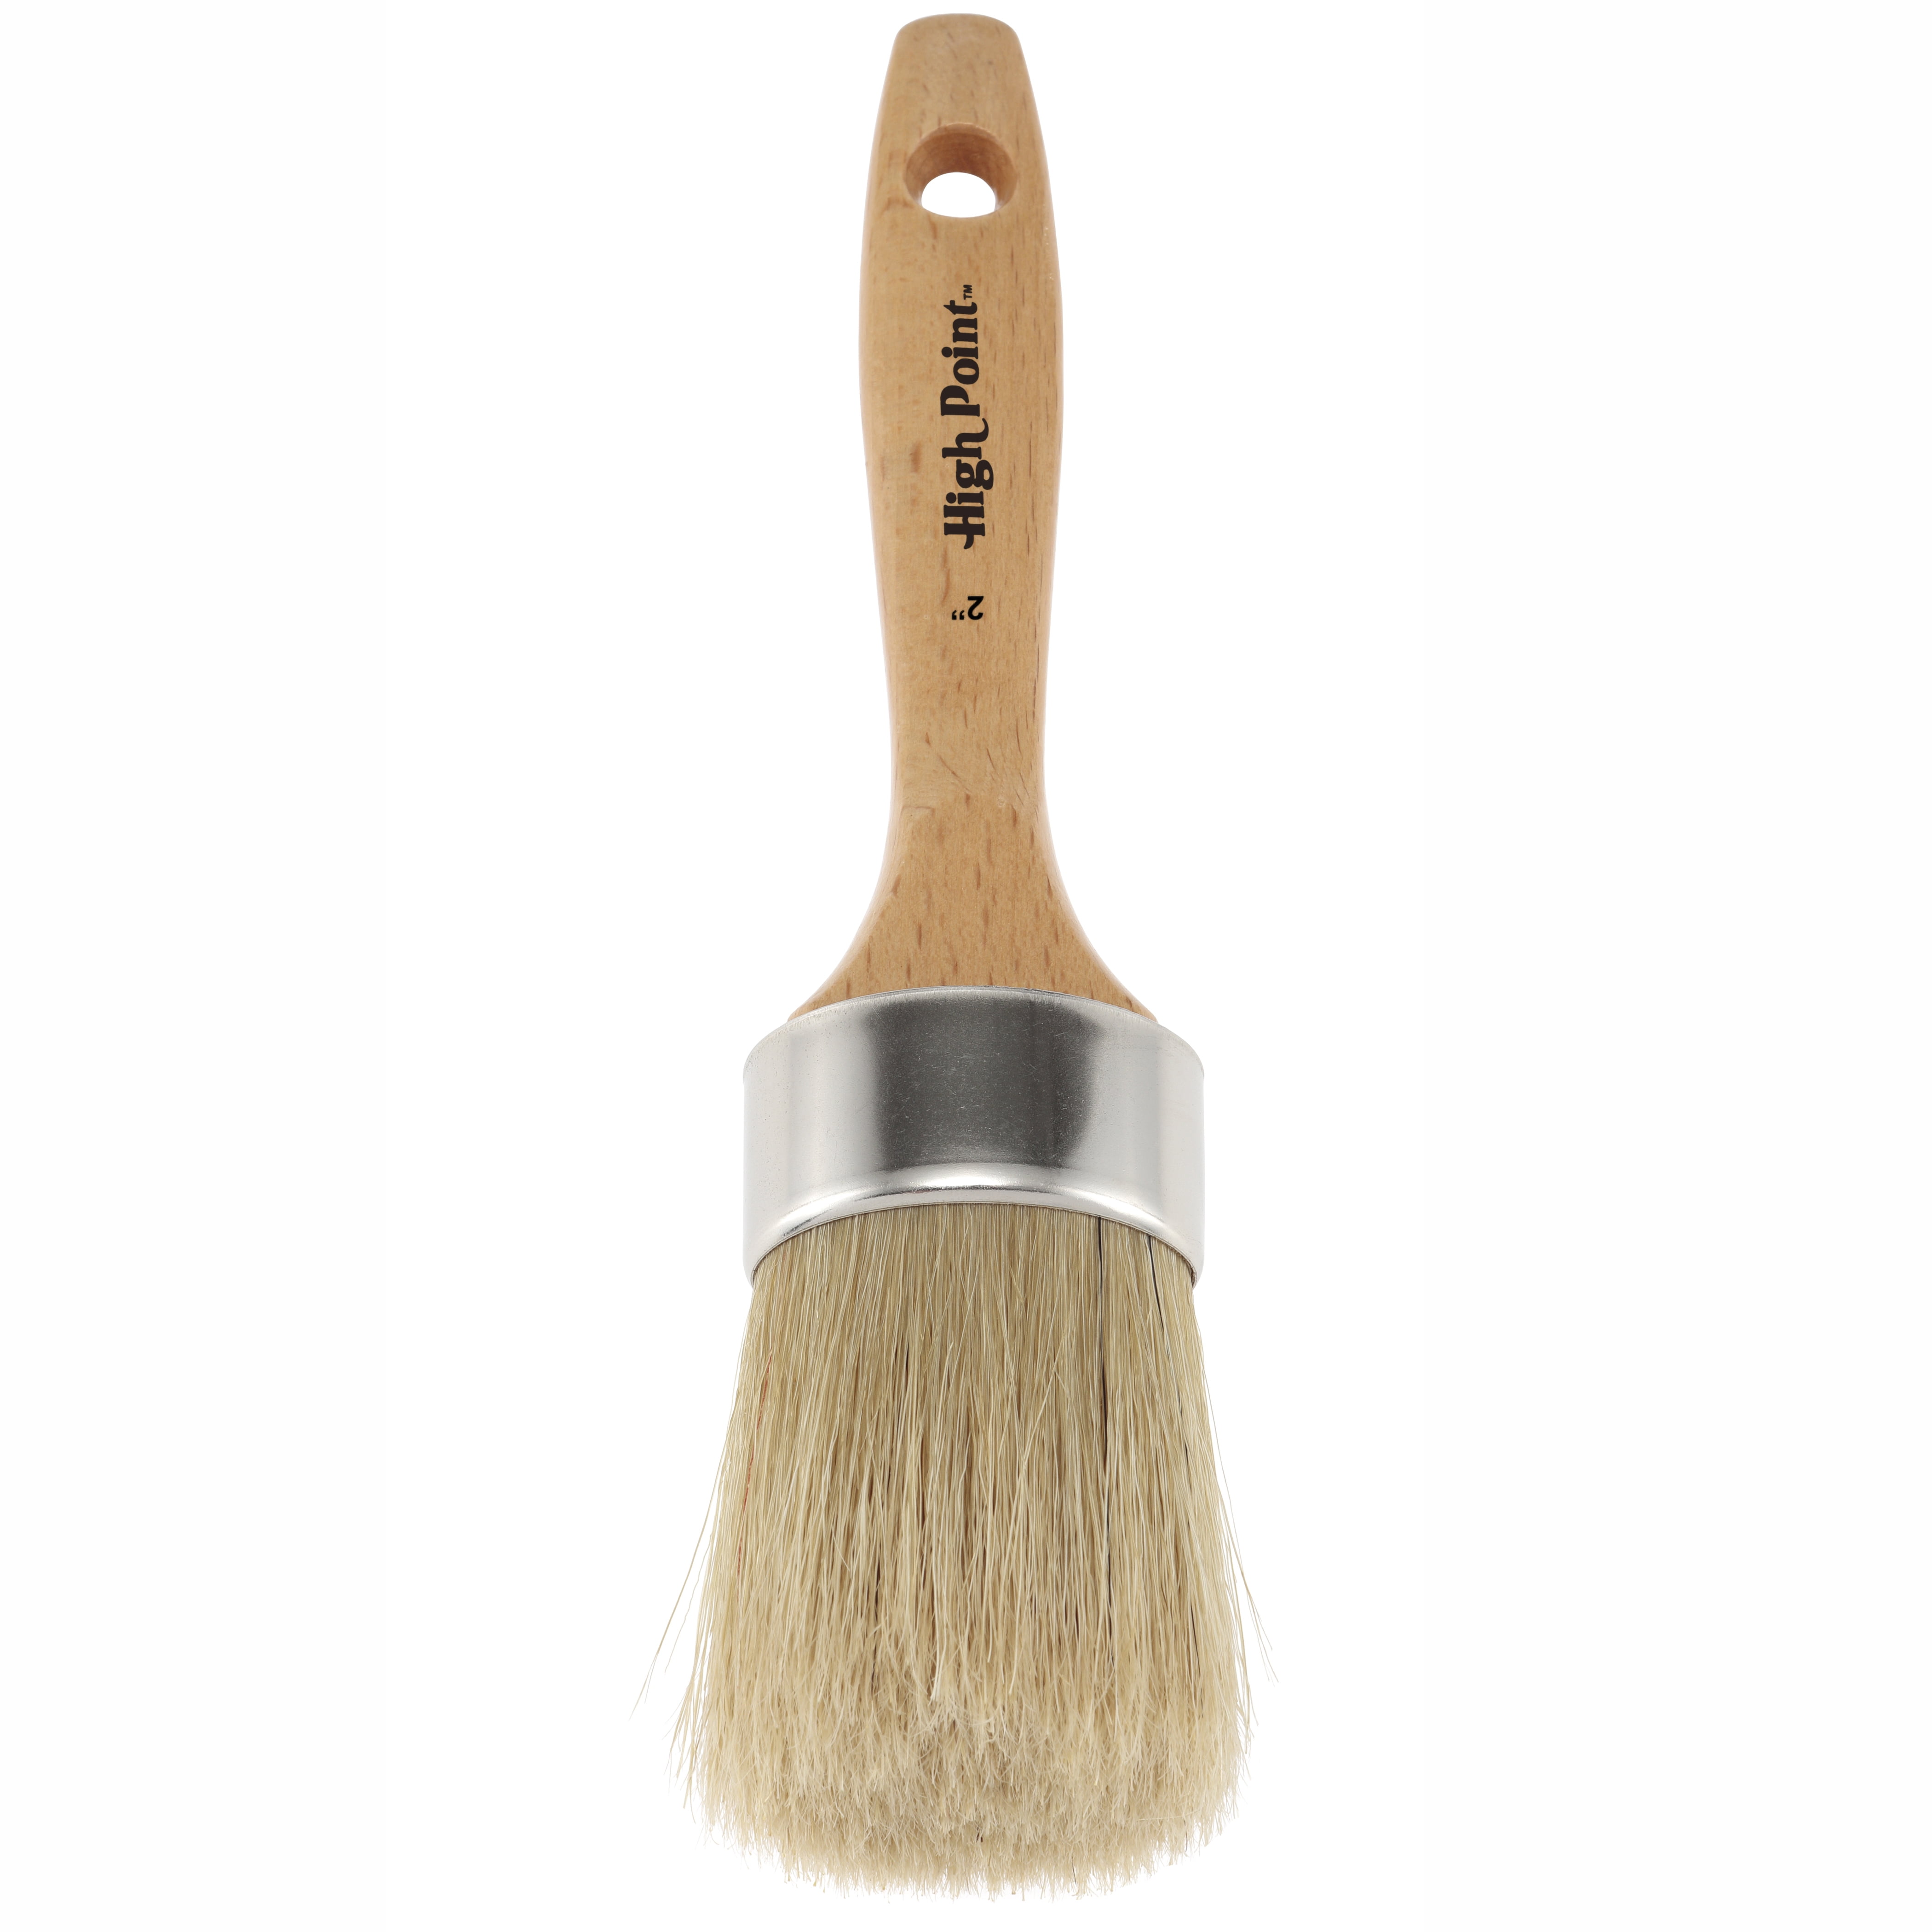 Large 2-in-1 Round Chalk & Wax Finishing Brush All Natural Hog Bristles  Ergonomic Handle Stencil & Pouncer Paintbrush for DIY Furniture, Hobby  Paint